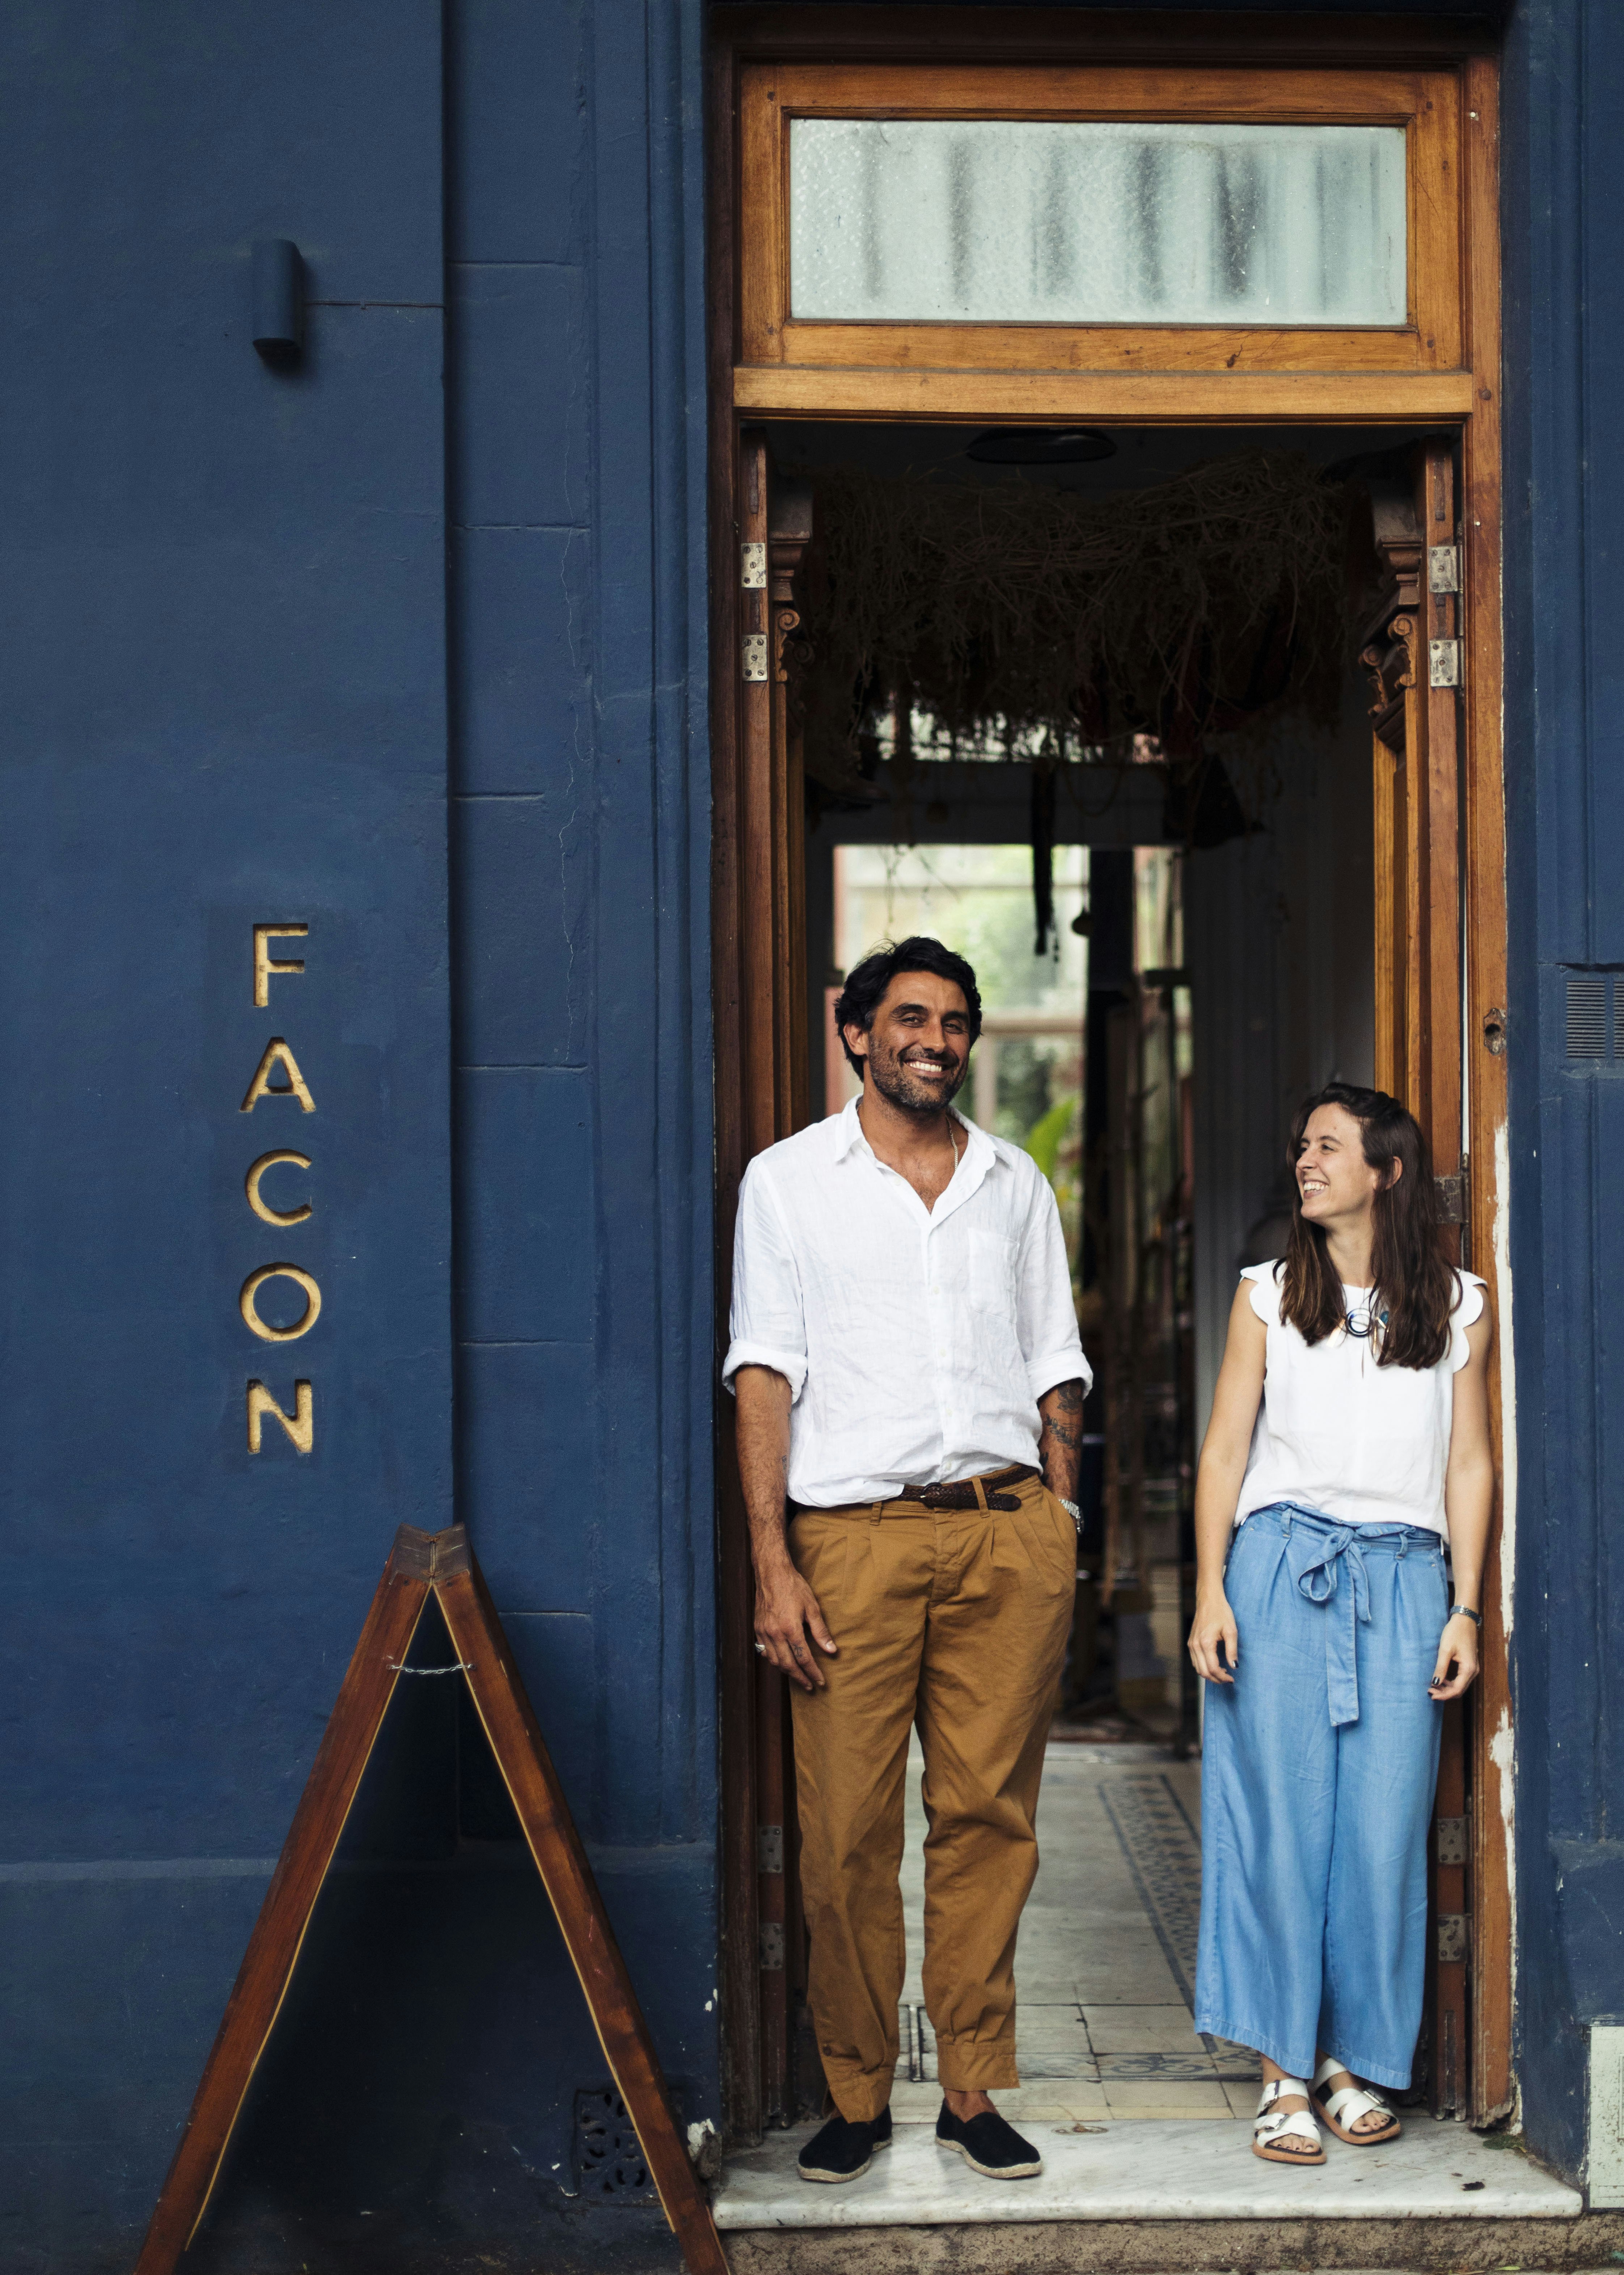 A man and woman stand in a doorway surrounded by a blue wall